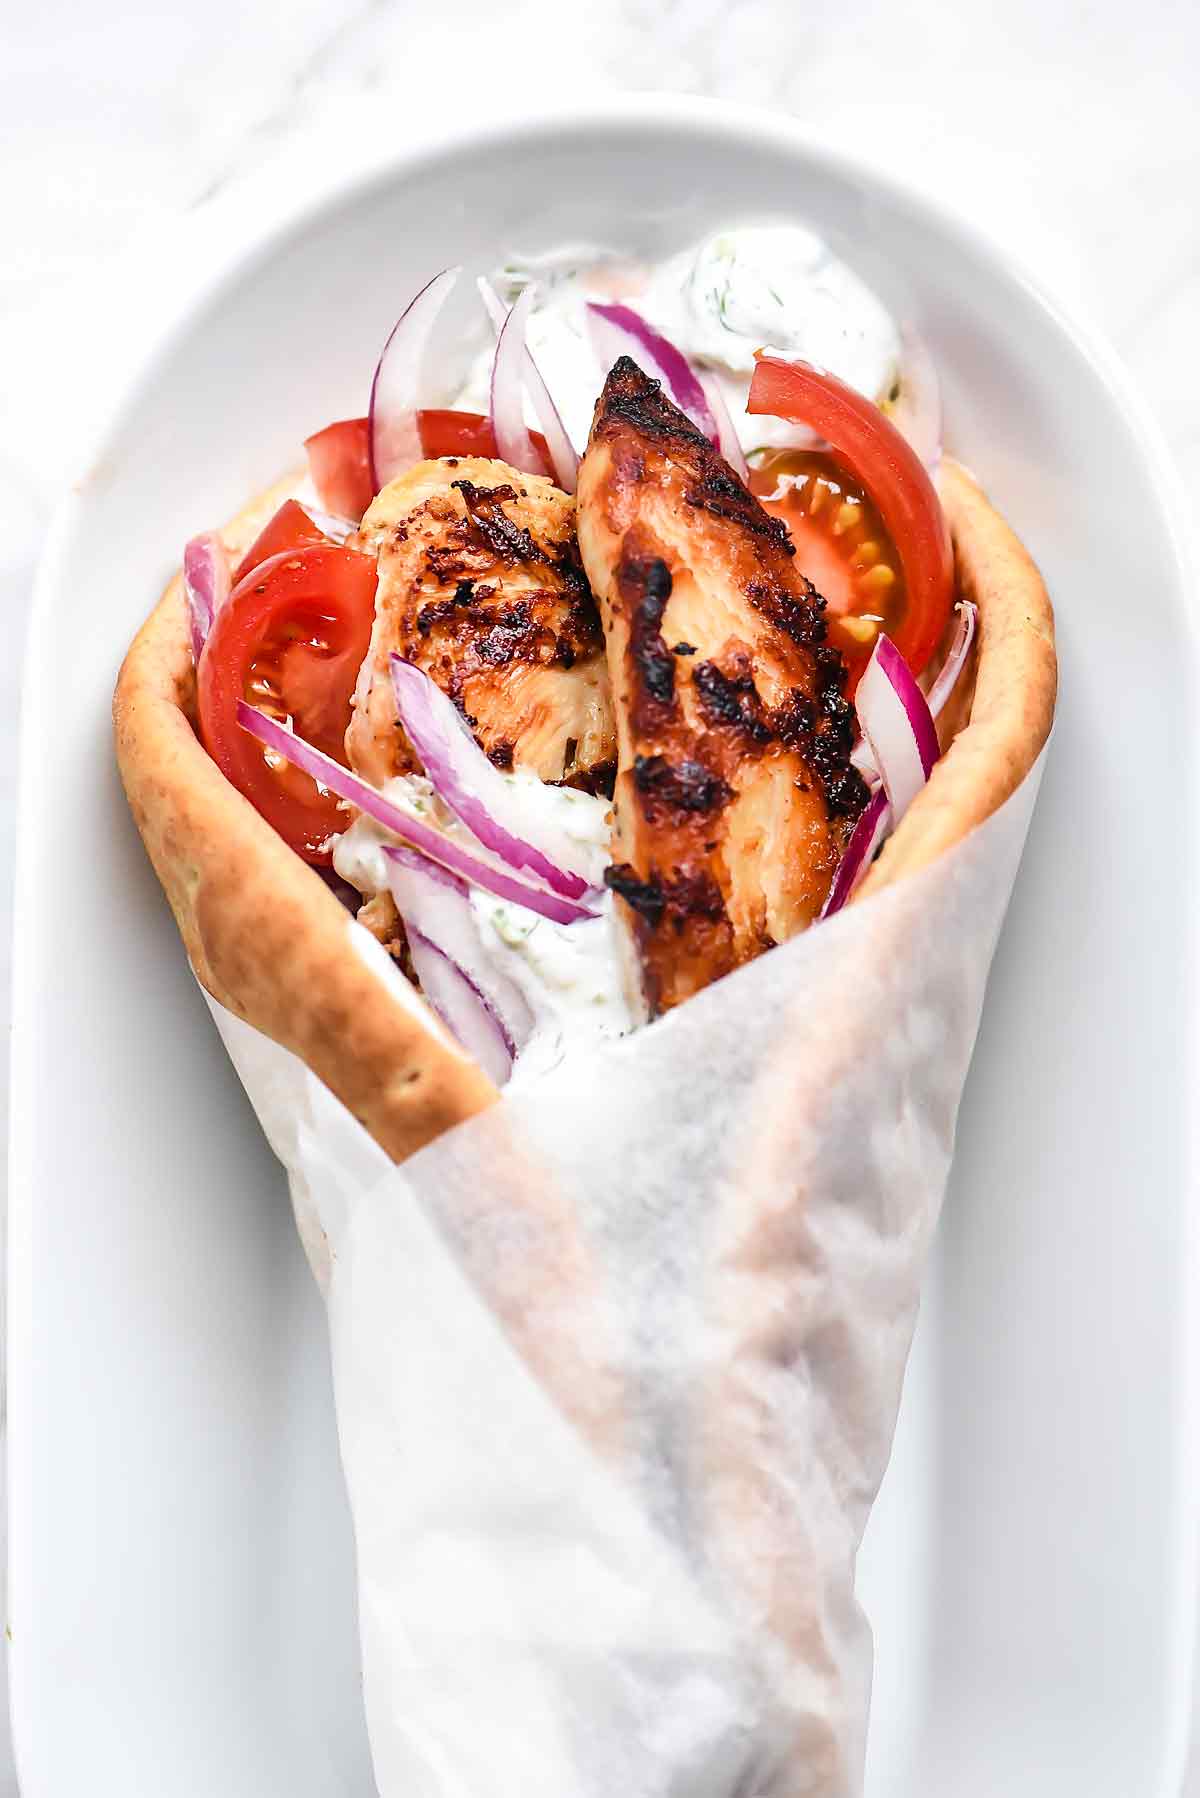 Easy Chicken Gyros with Tzatziki Sauce from foodiecrush.com on foodiecrush.com